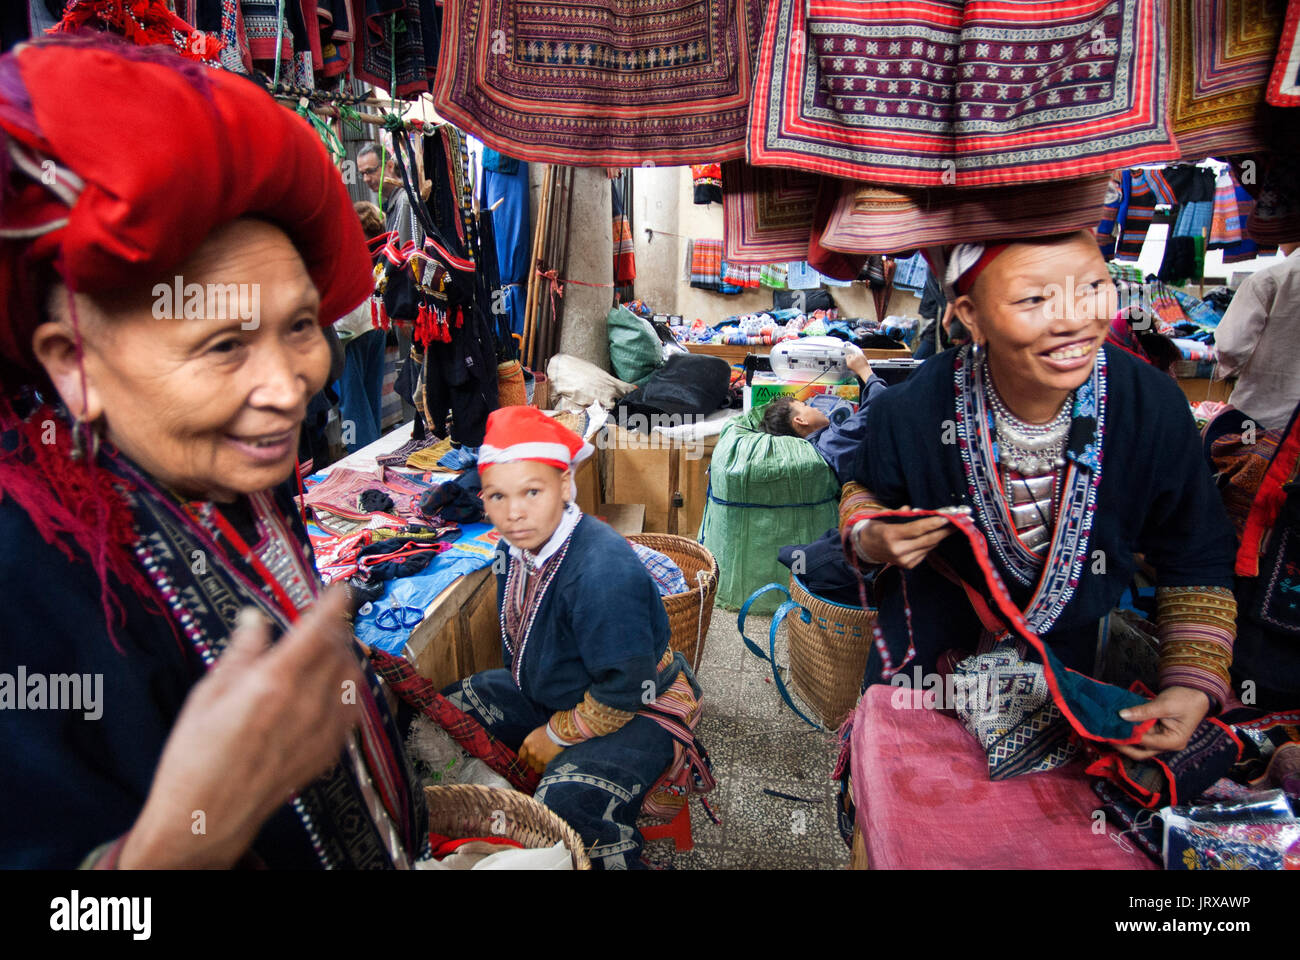 Red dao hmong women make and sell tribal handicrafts and clothes iniside the market in Sapa, Lao Cai Province, Vietnam Stock Photo